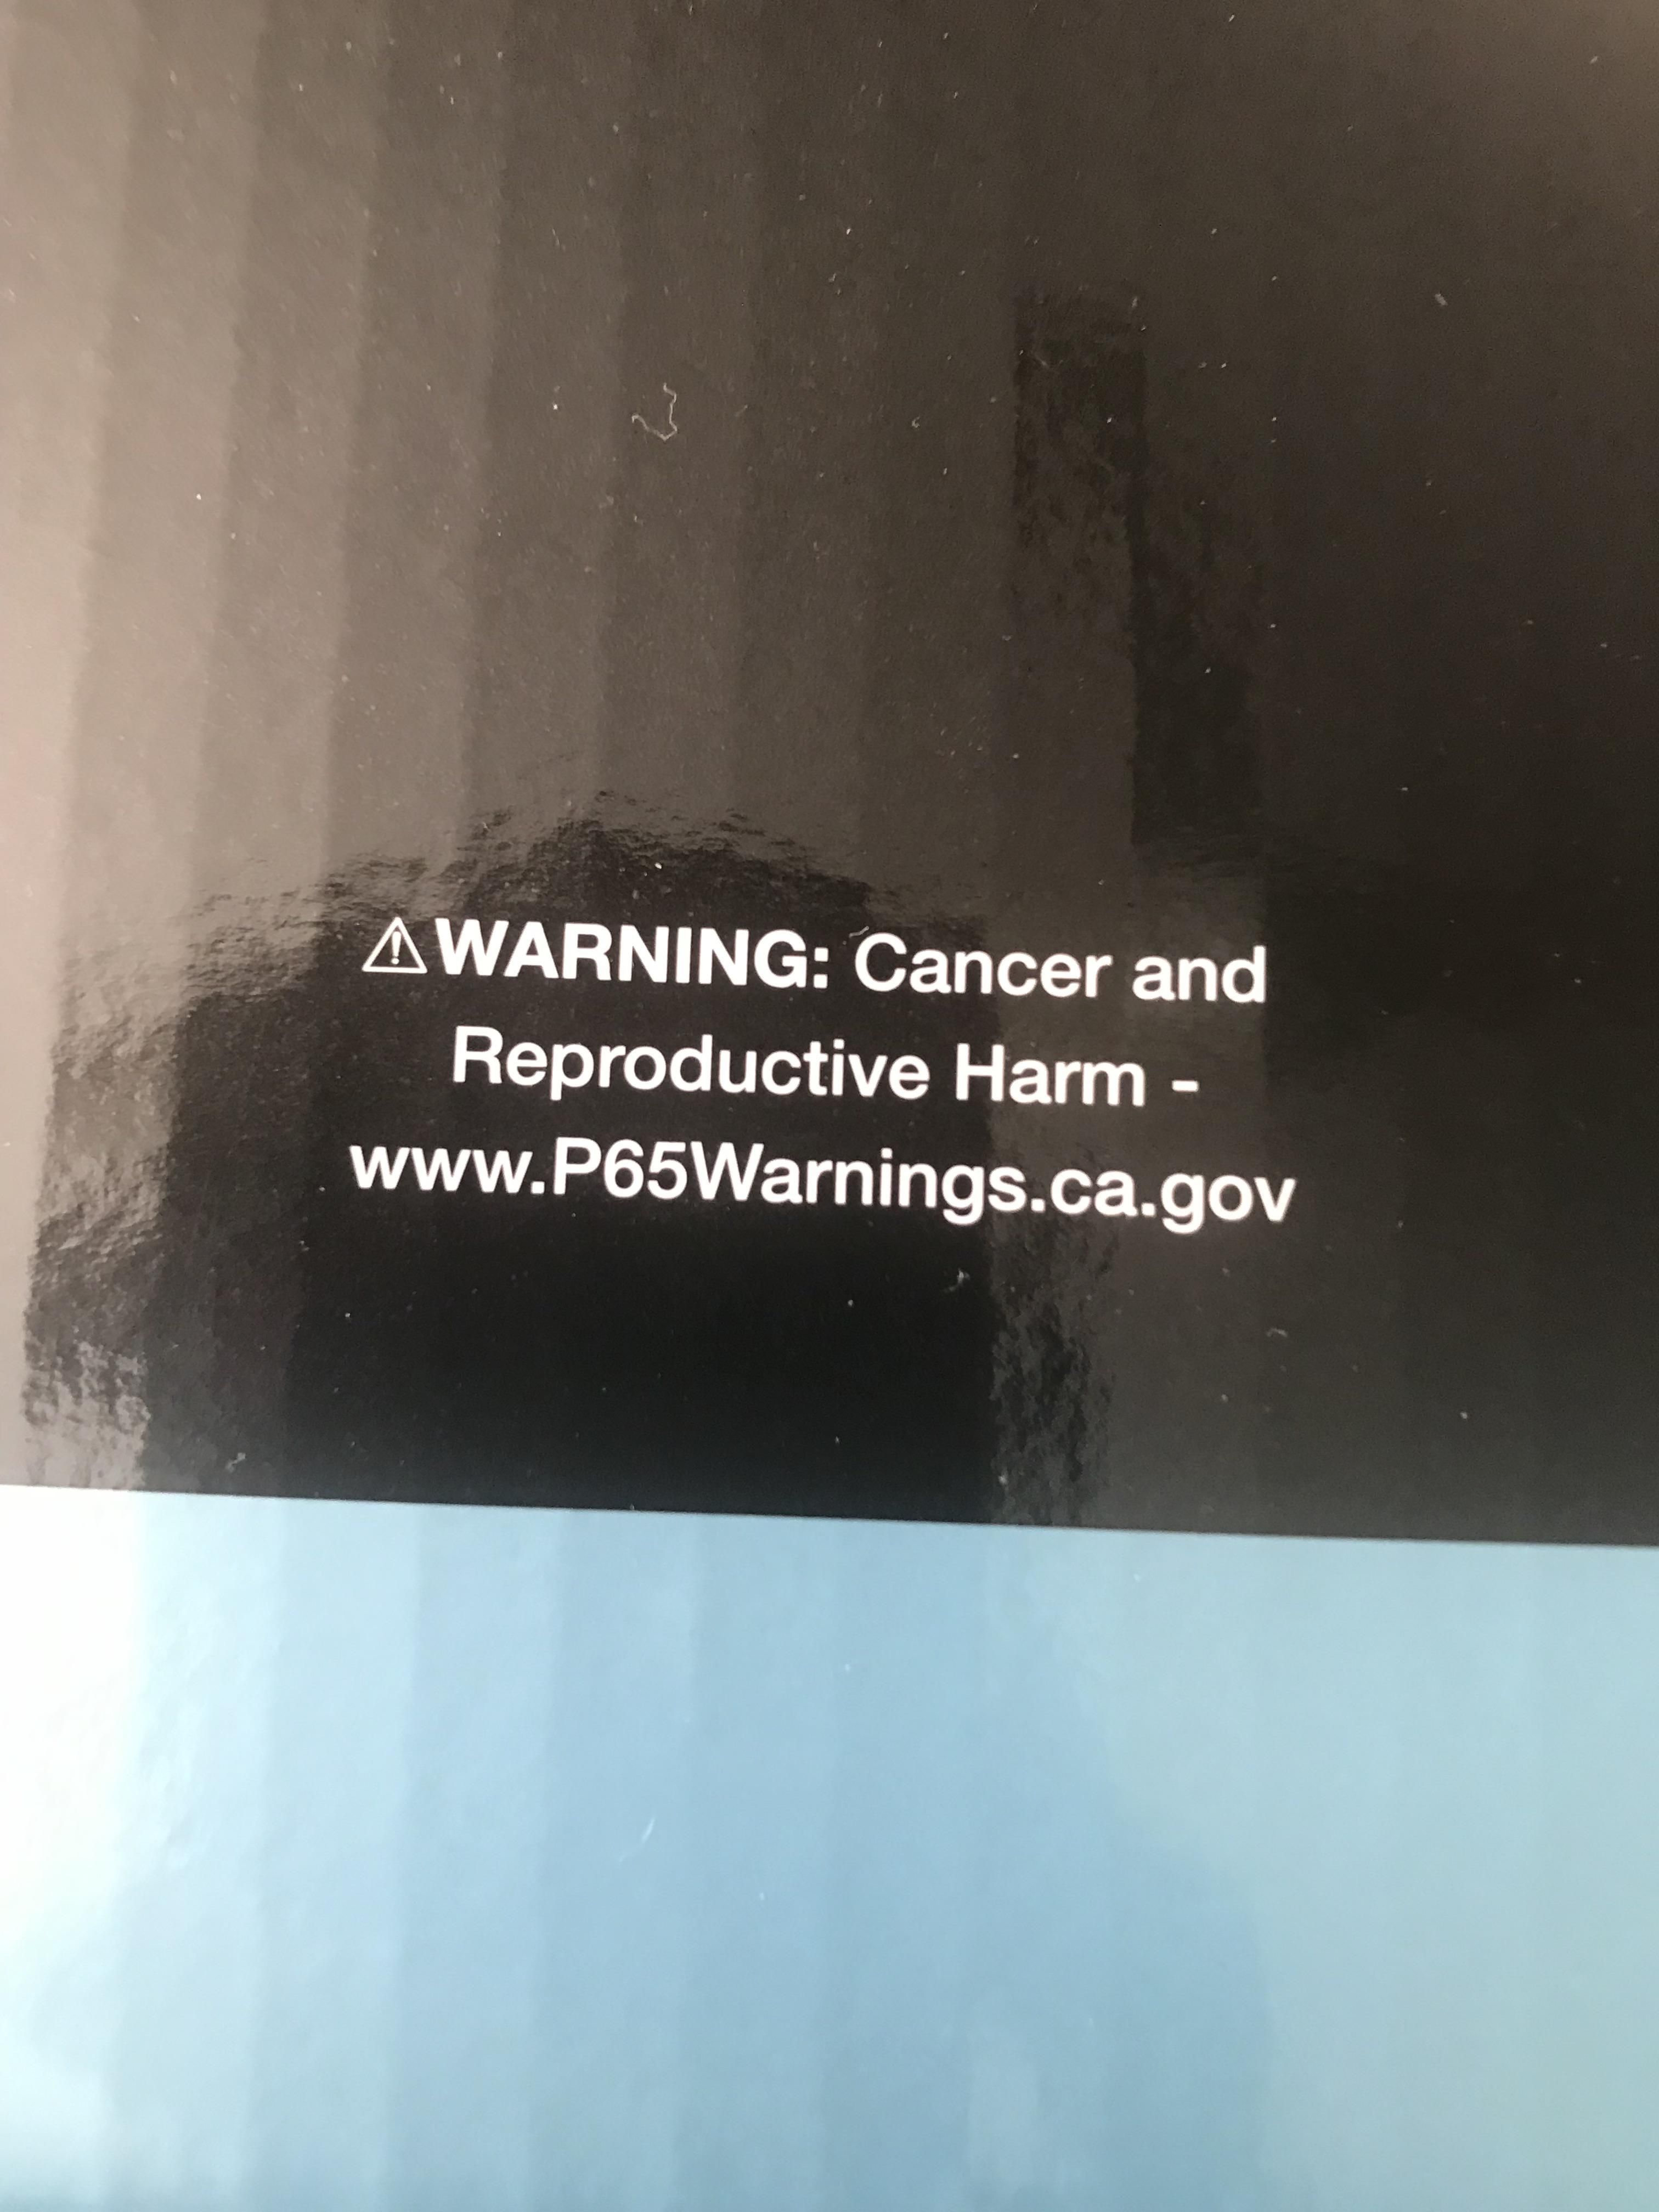 This warning on my guitar stand’s box